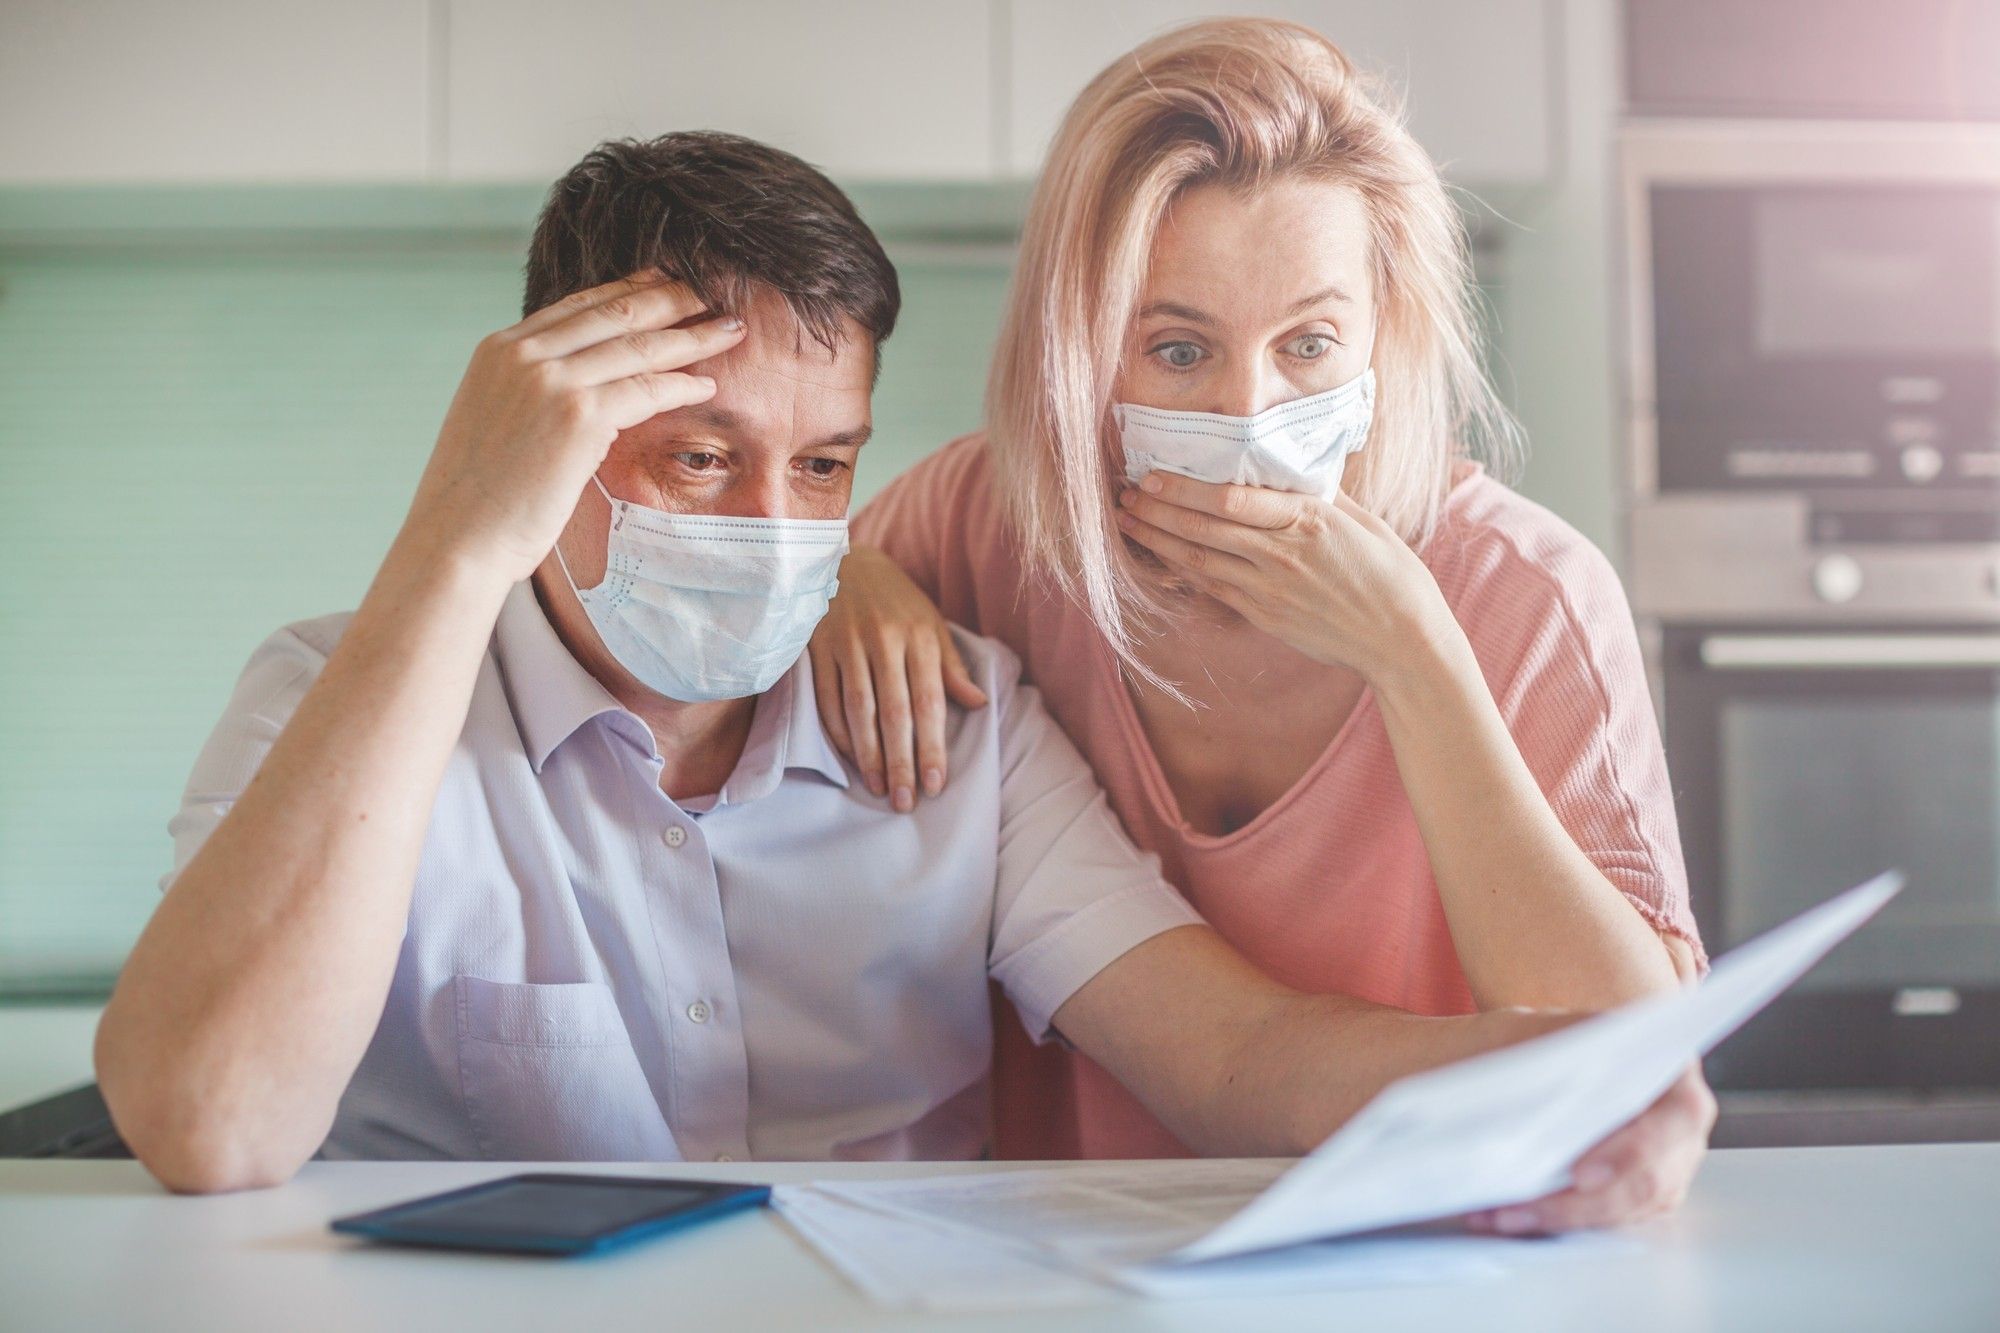 Coronavirus illness may come with the additional stress of surprise medical bills.